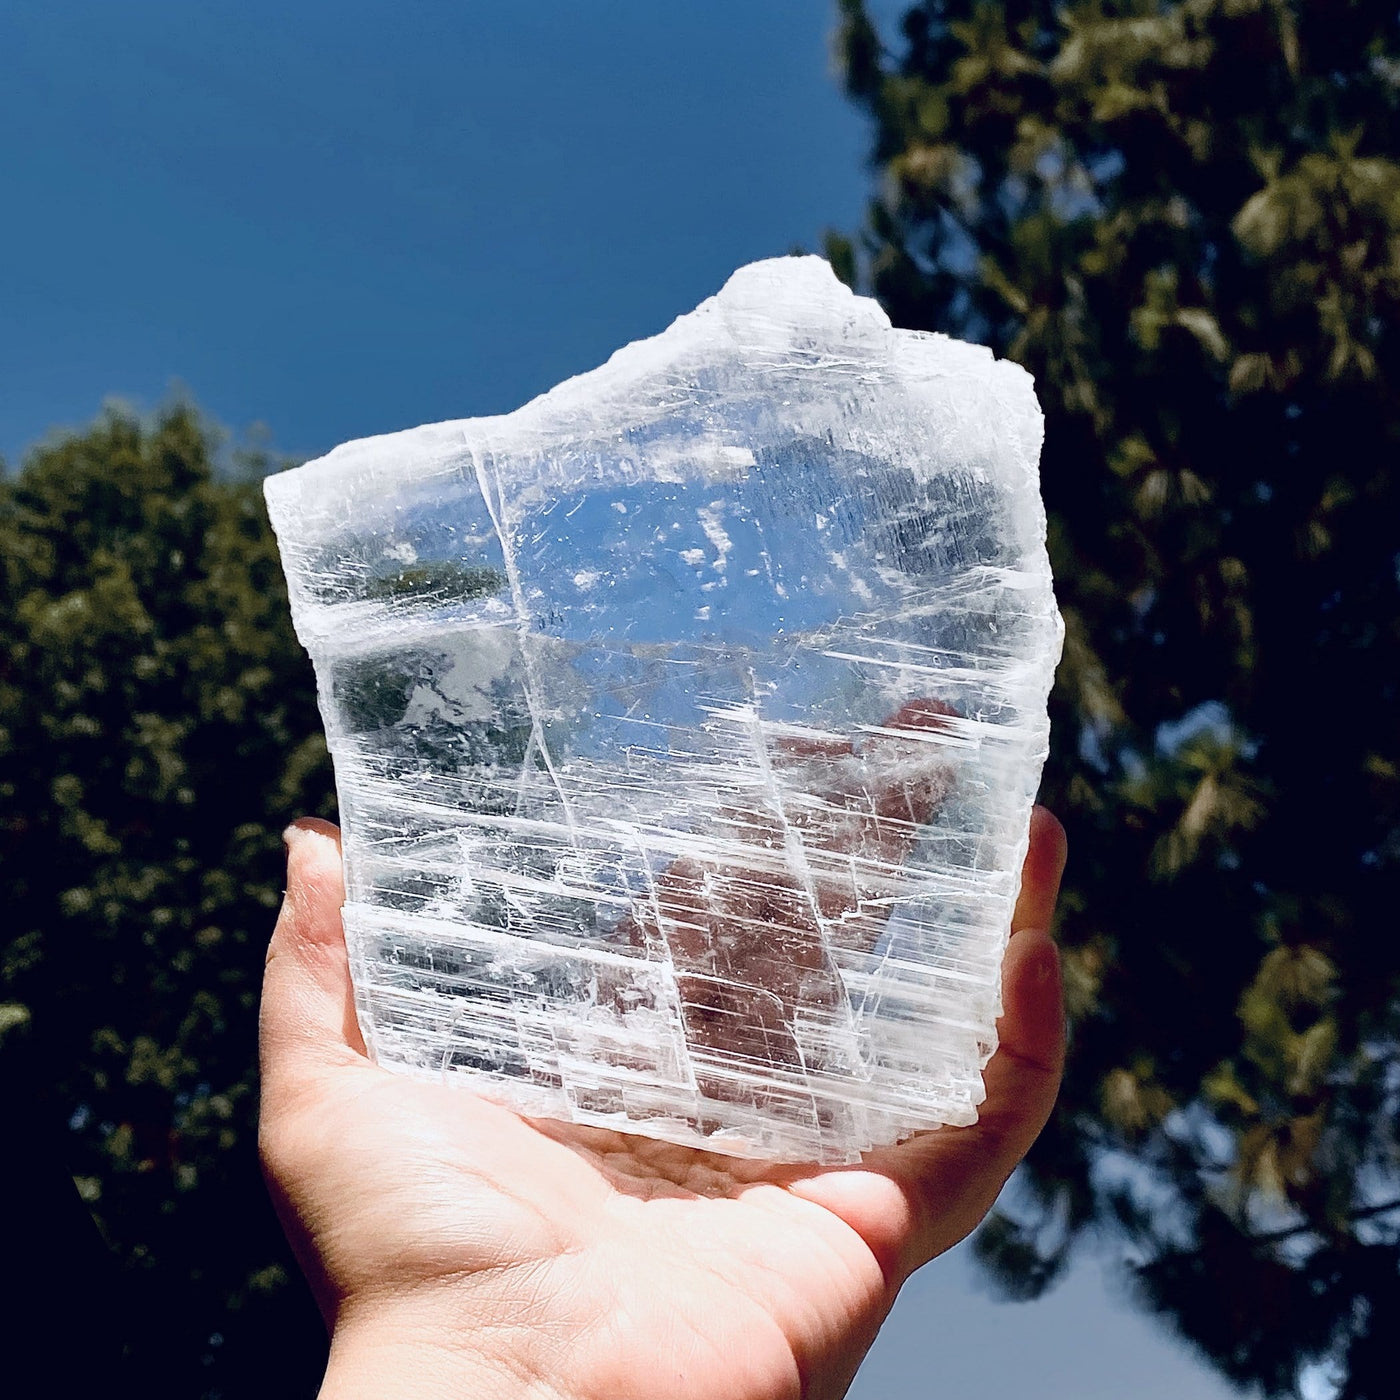 selenite transparent slab in hand for size reference